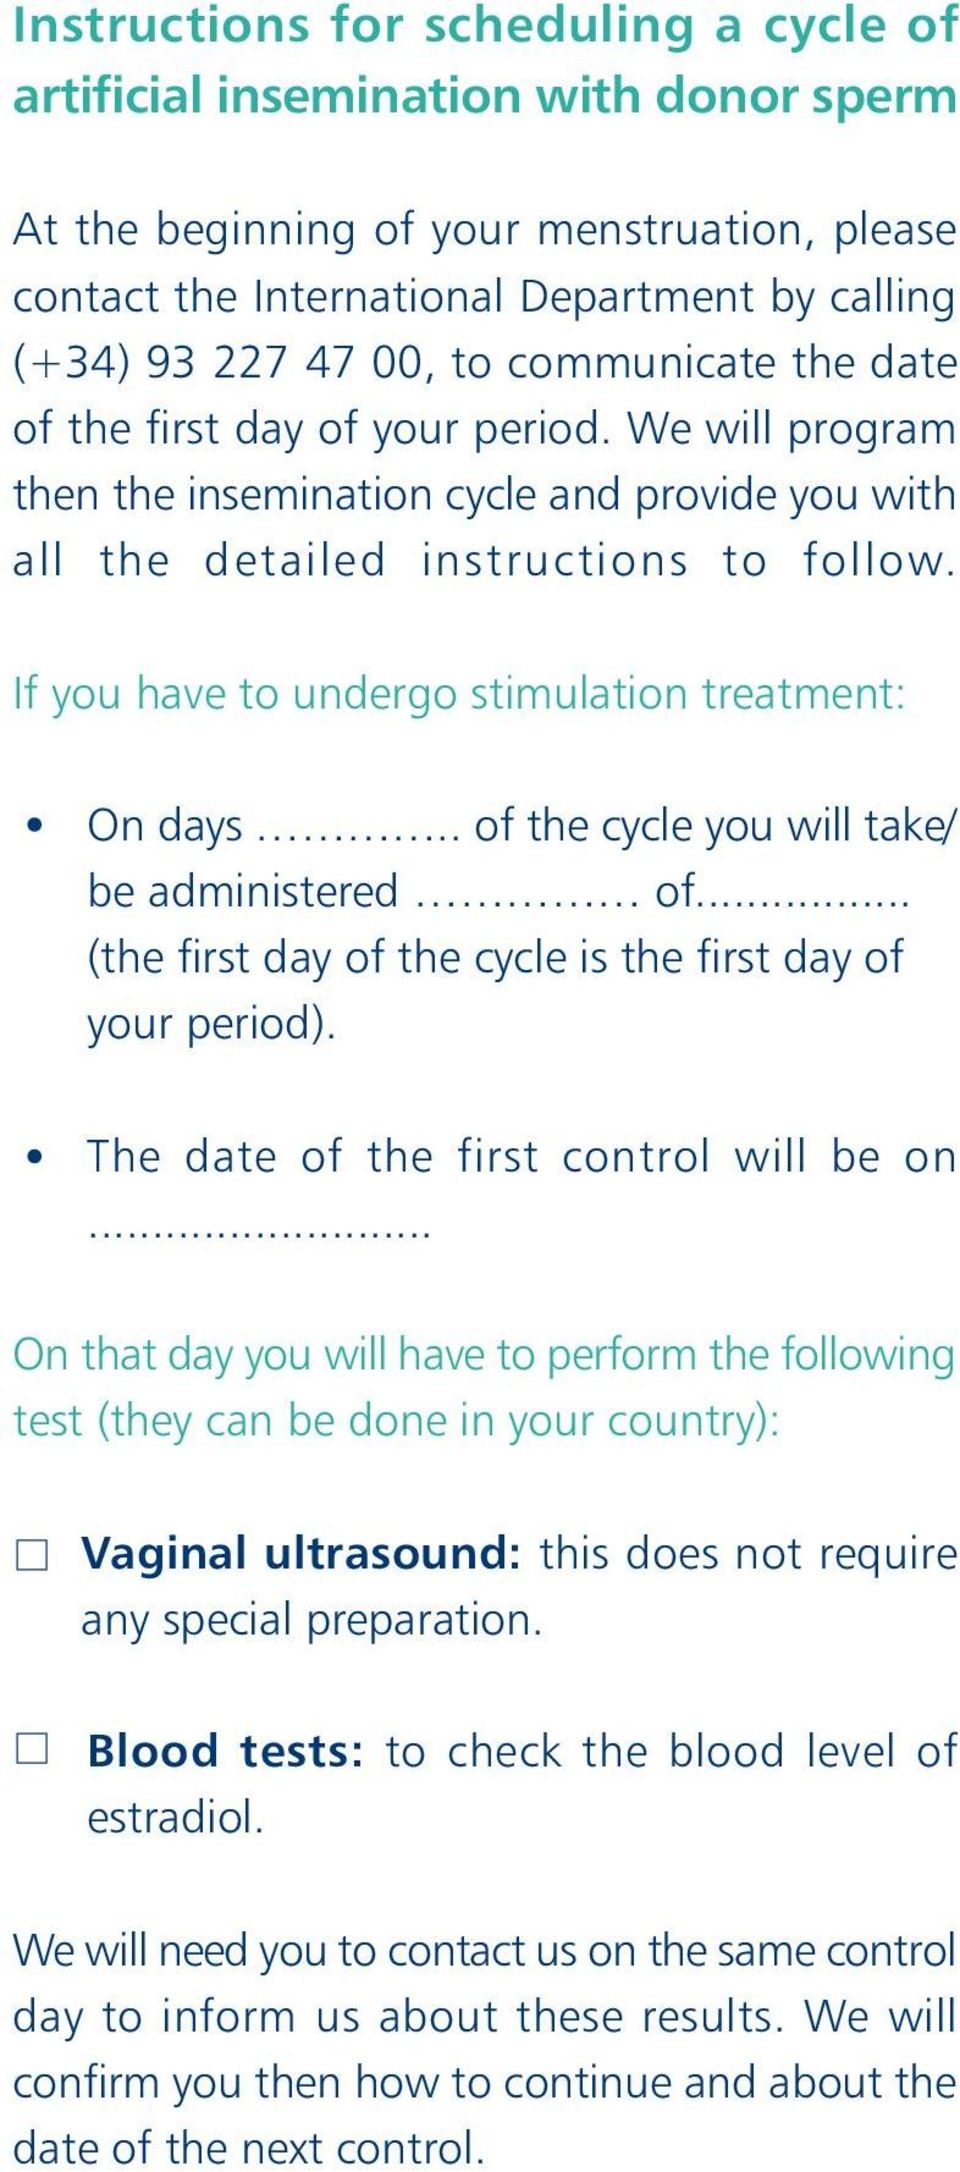 If you have to undergo stimulation treatment: On days.. of the cycle you will take/ be administered of... (the first day of the cycle is the first day of your period).